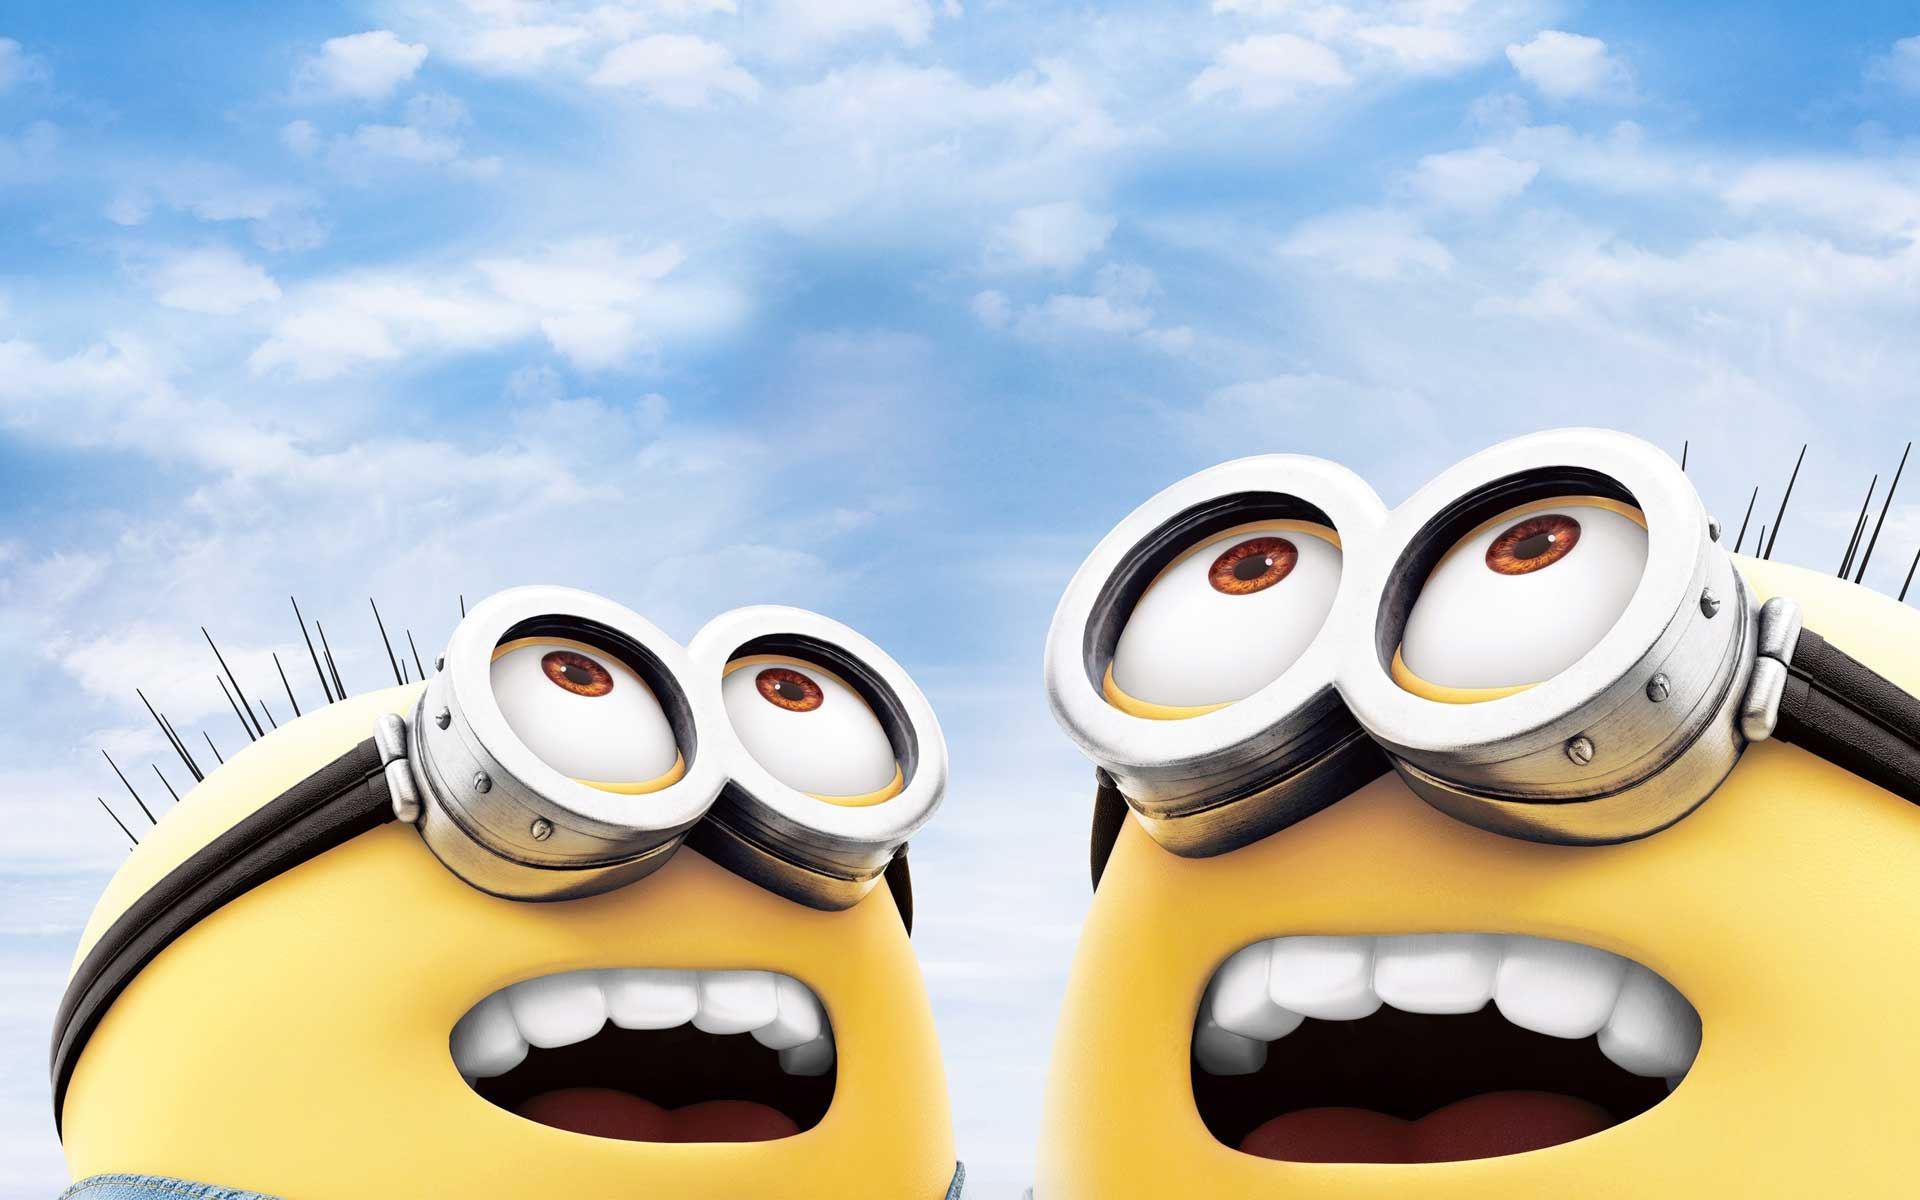 Minions wallpapers that will amuse you every day